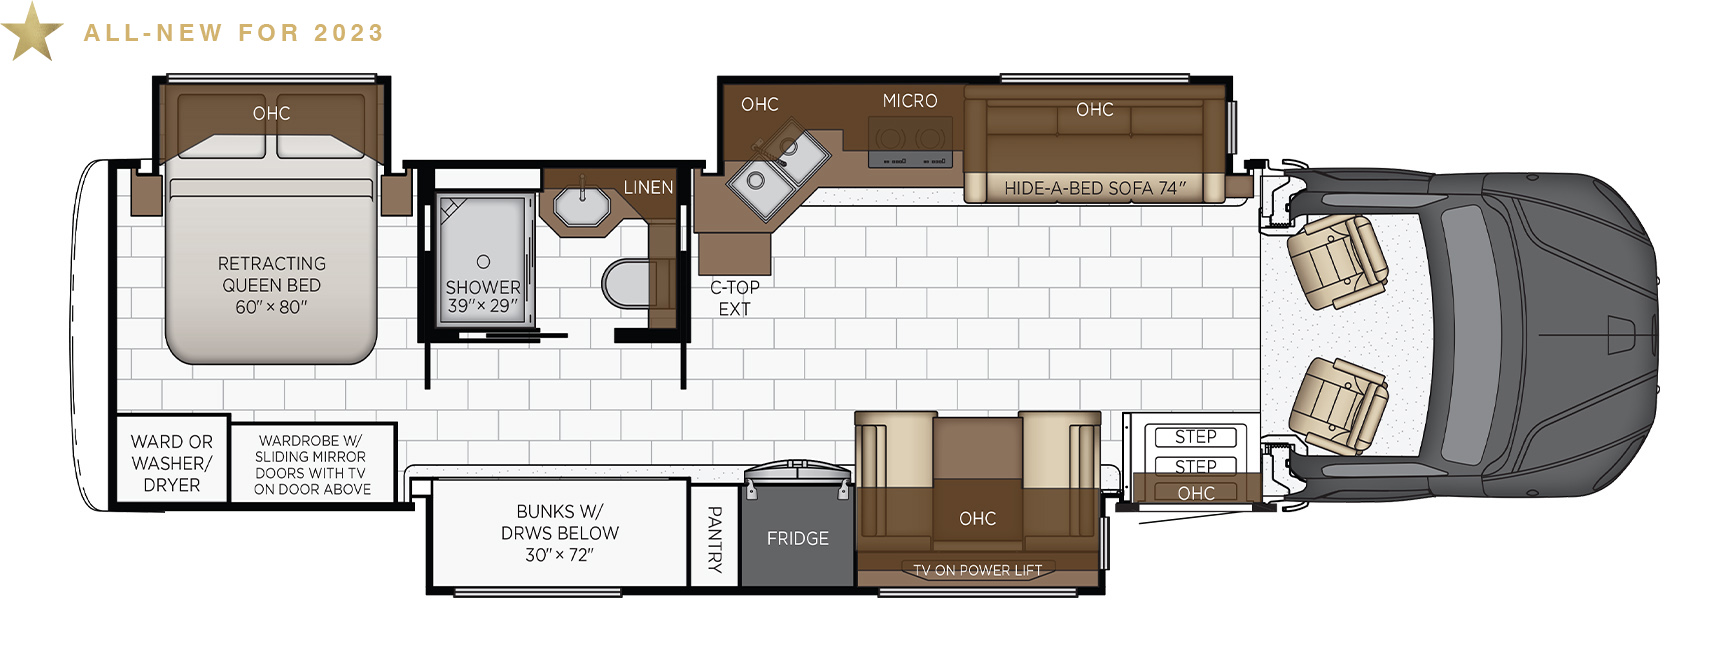 The floor plan of the 2023 Newmar Super Star 3729, a Class A RV with bunk beds!